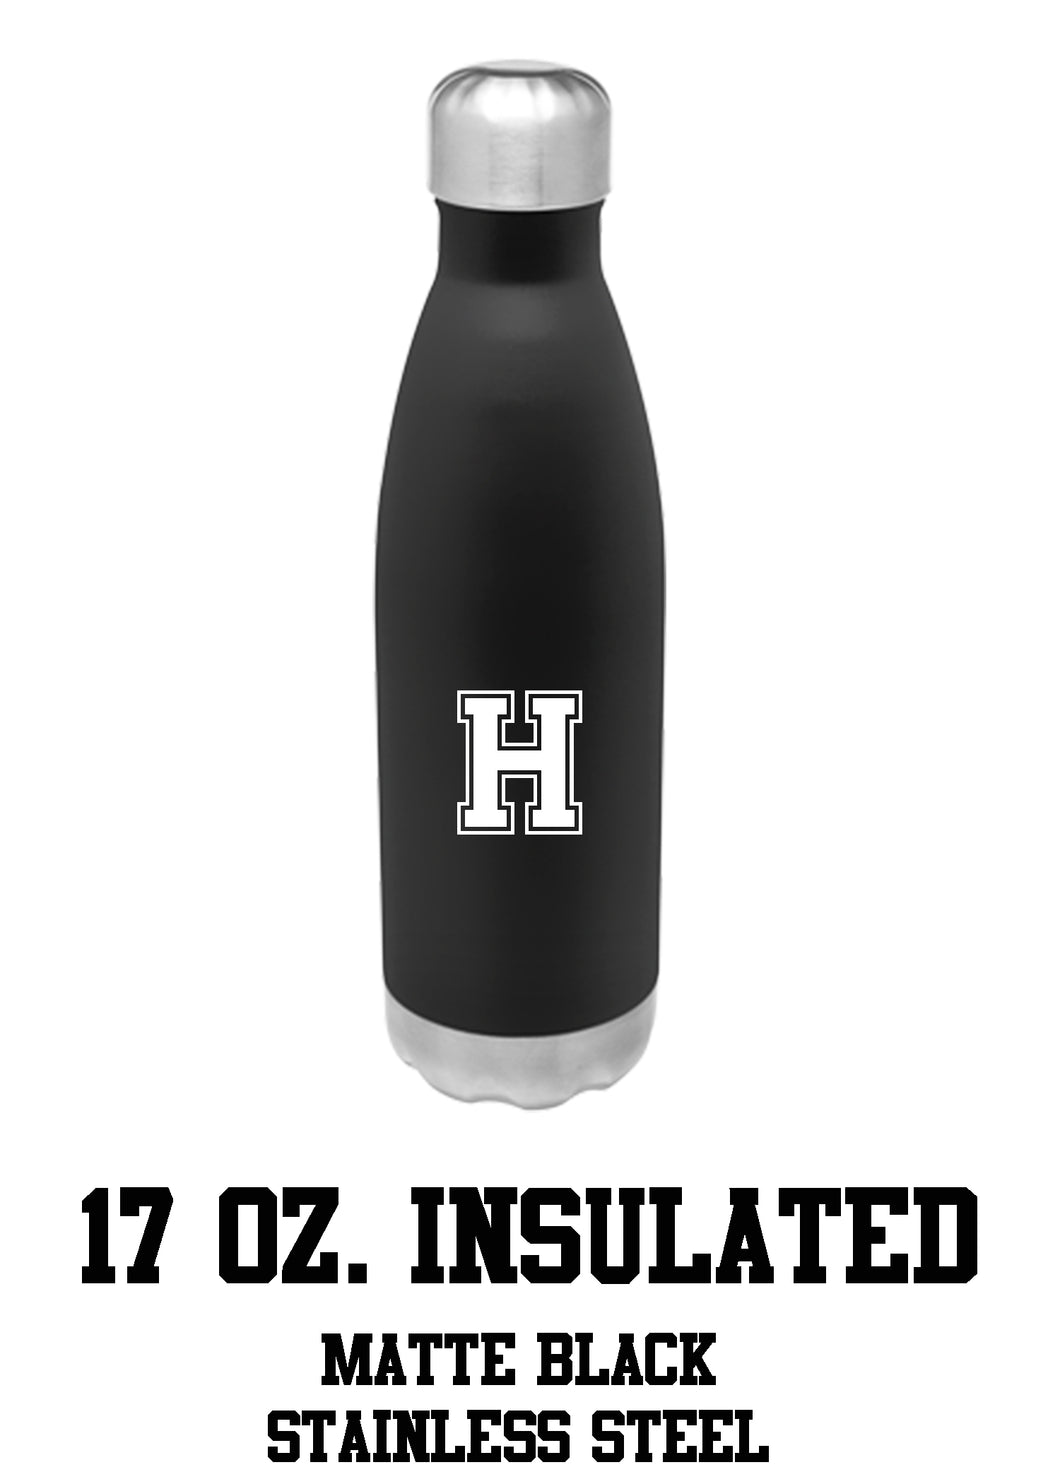 17 oz. thermal insulated water bottle (similar to SWELL BOTTLE)